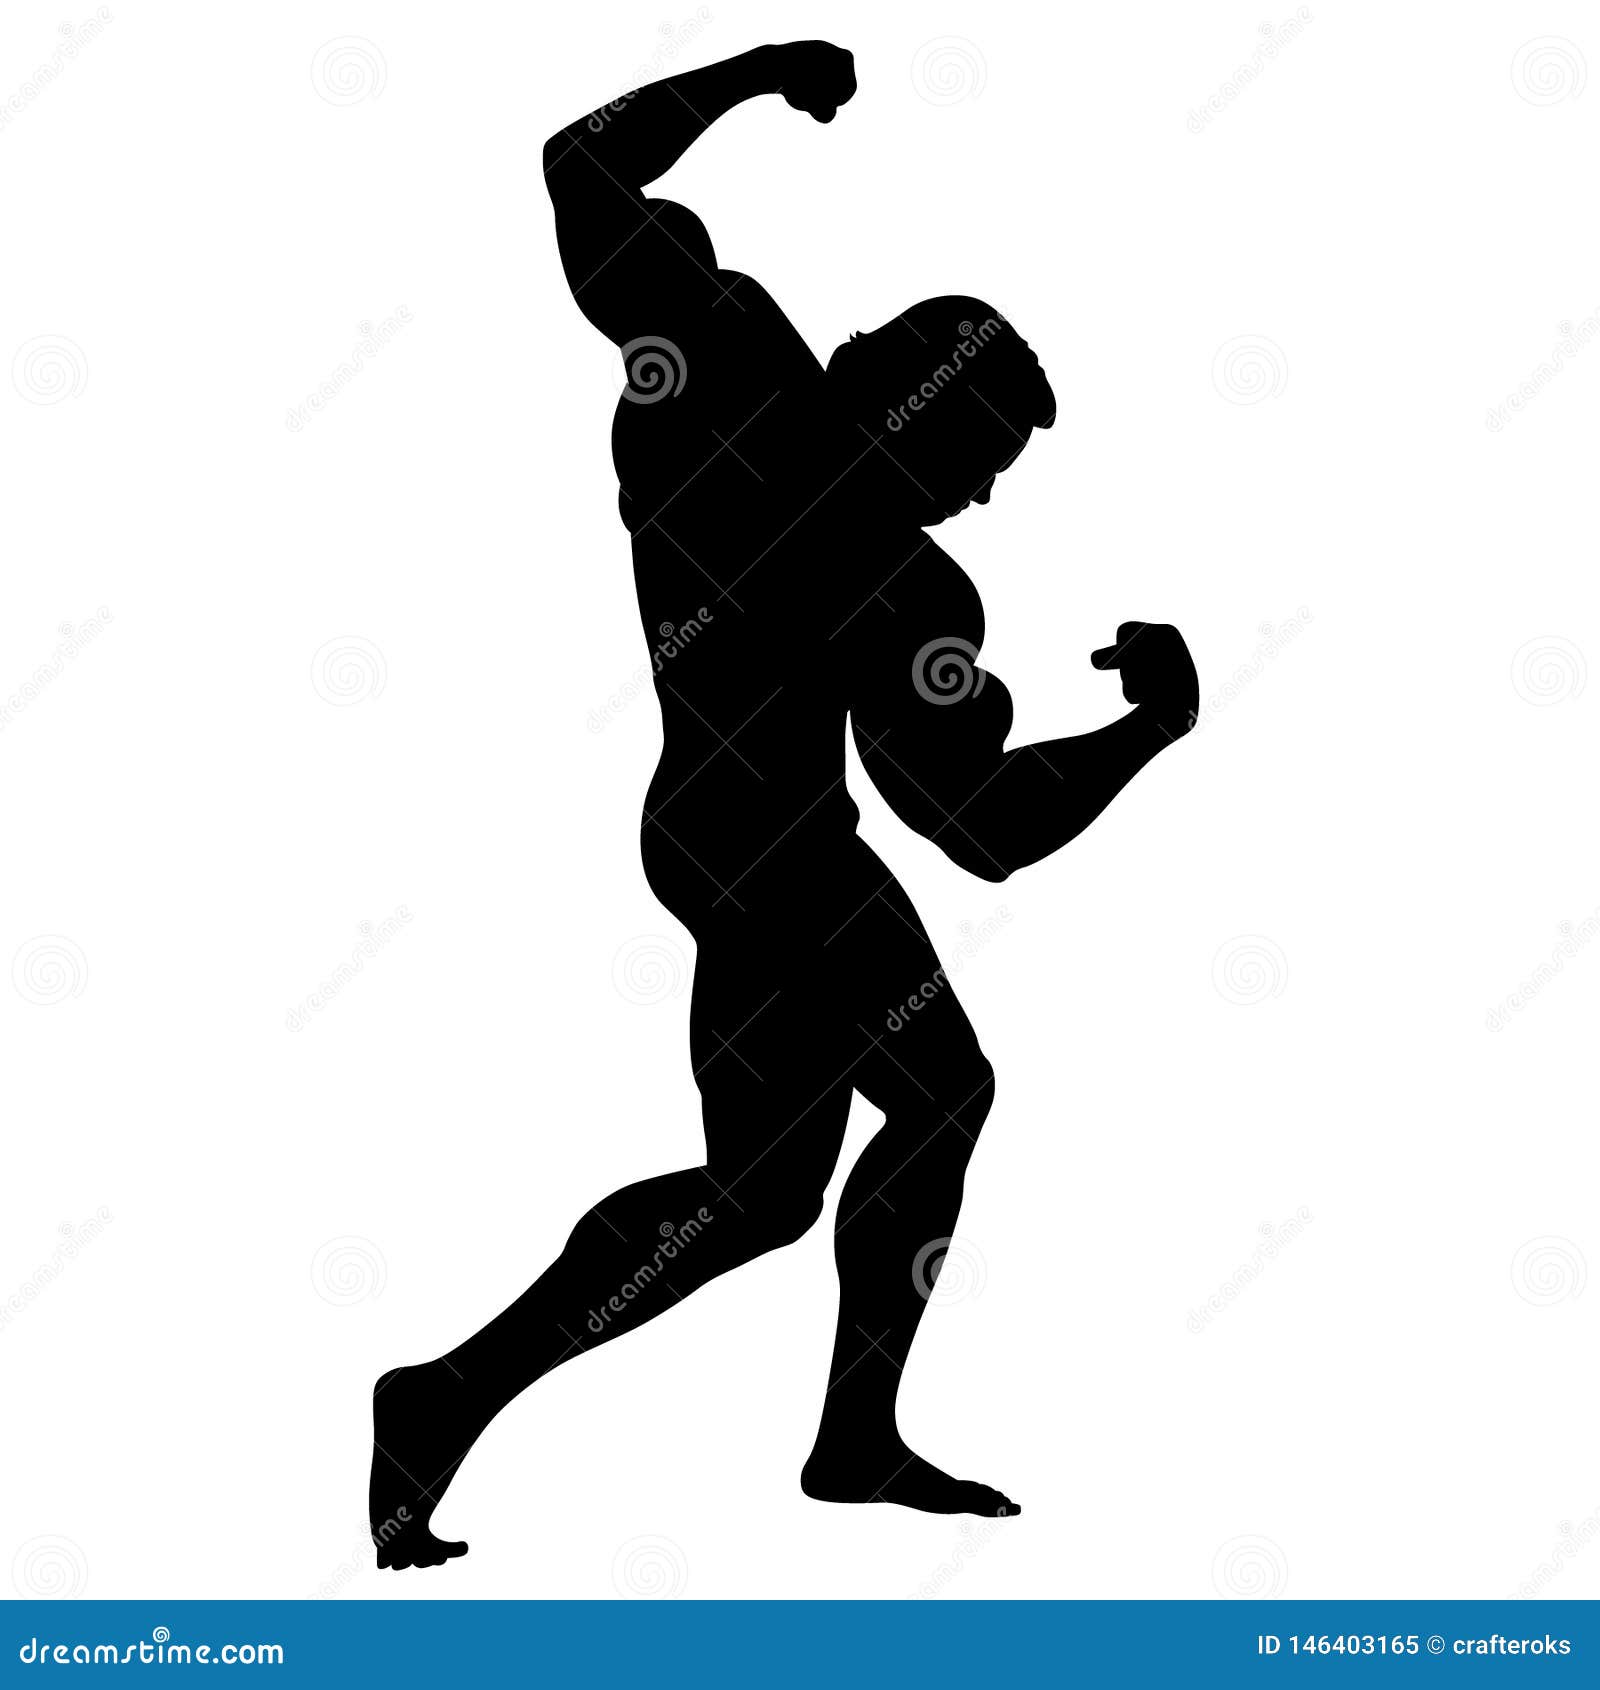 Bodybuilding Poses Silhouette Illustration by Crafteroks Stock Vector ...